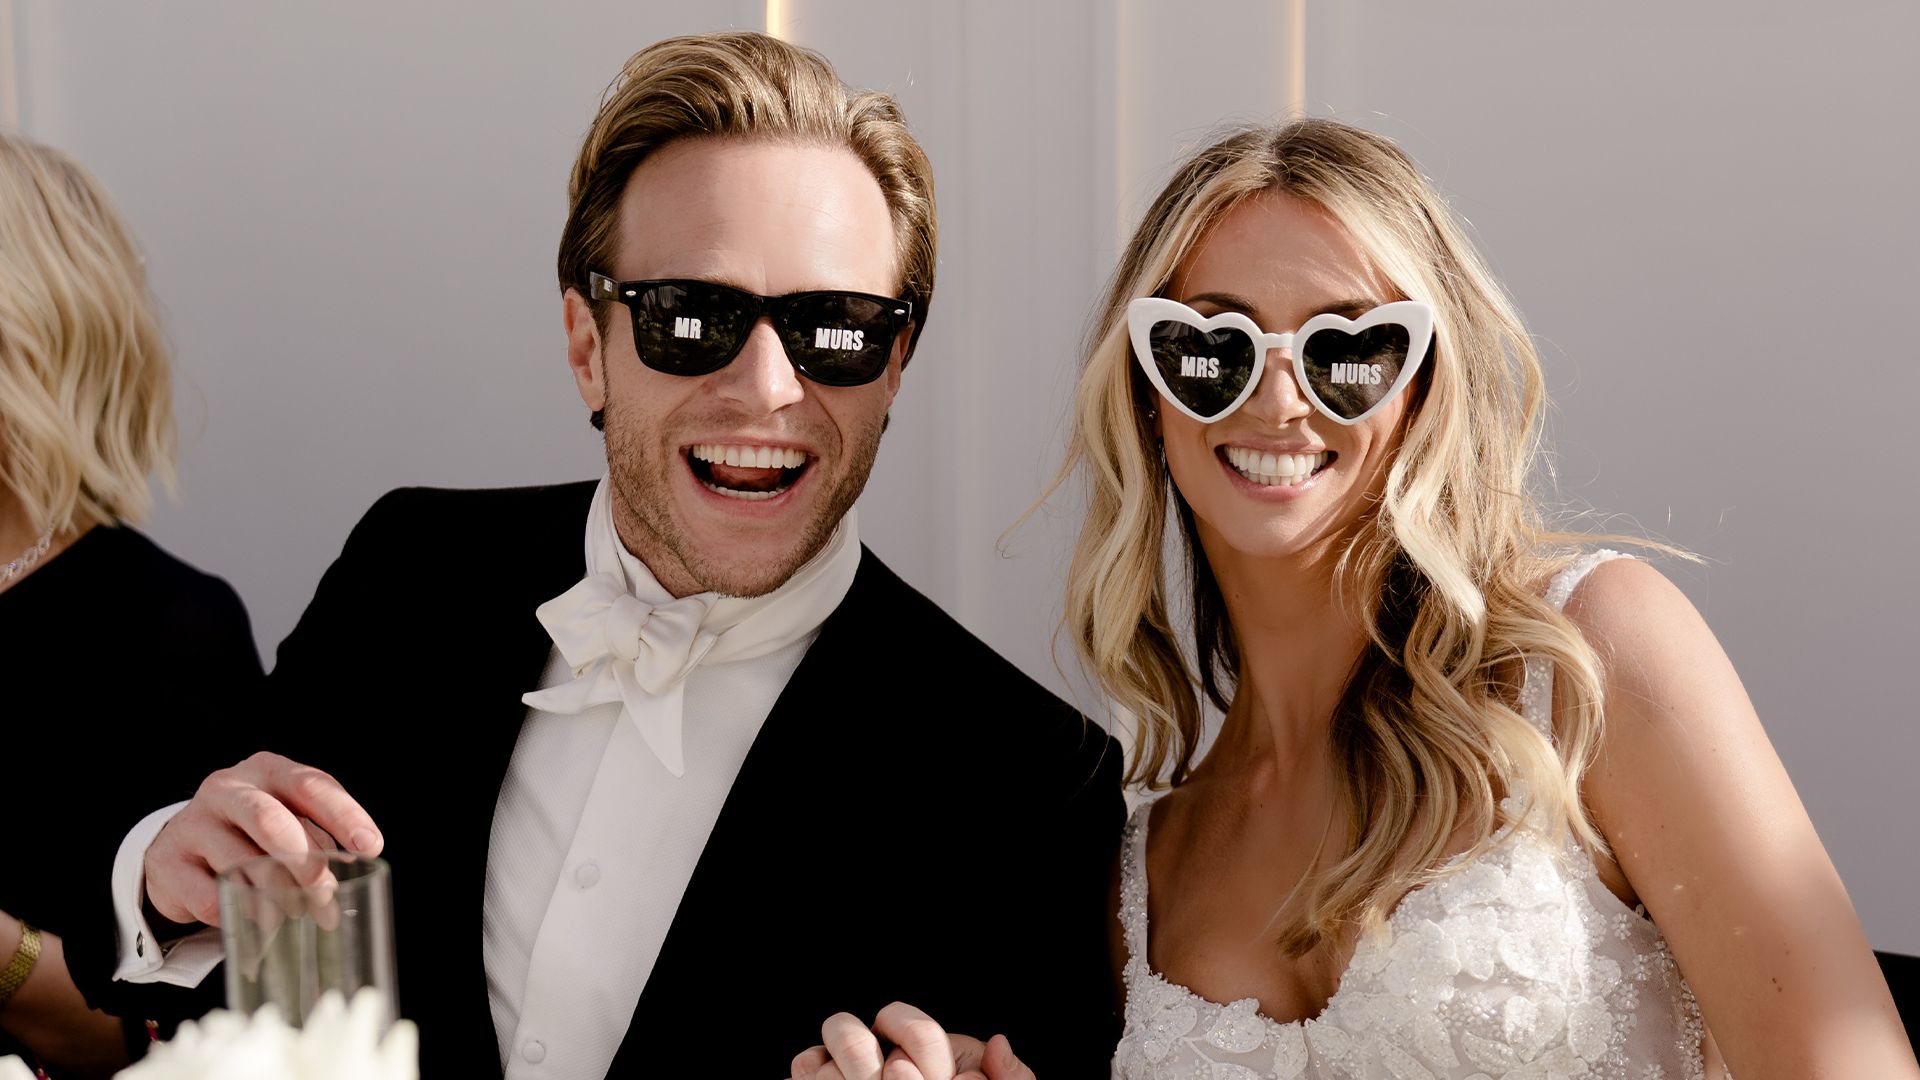 Olly Murs and his bride Amelia wear quirky sunglasses